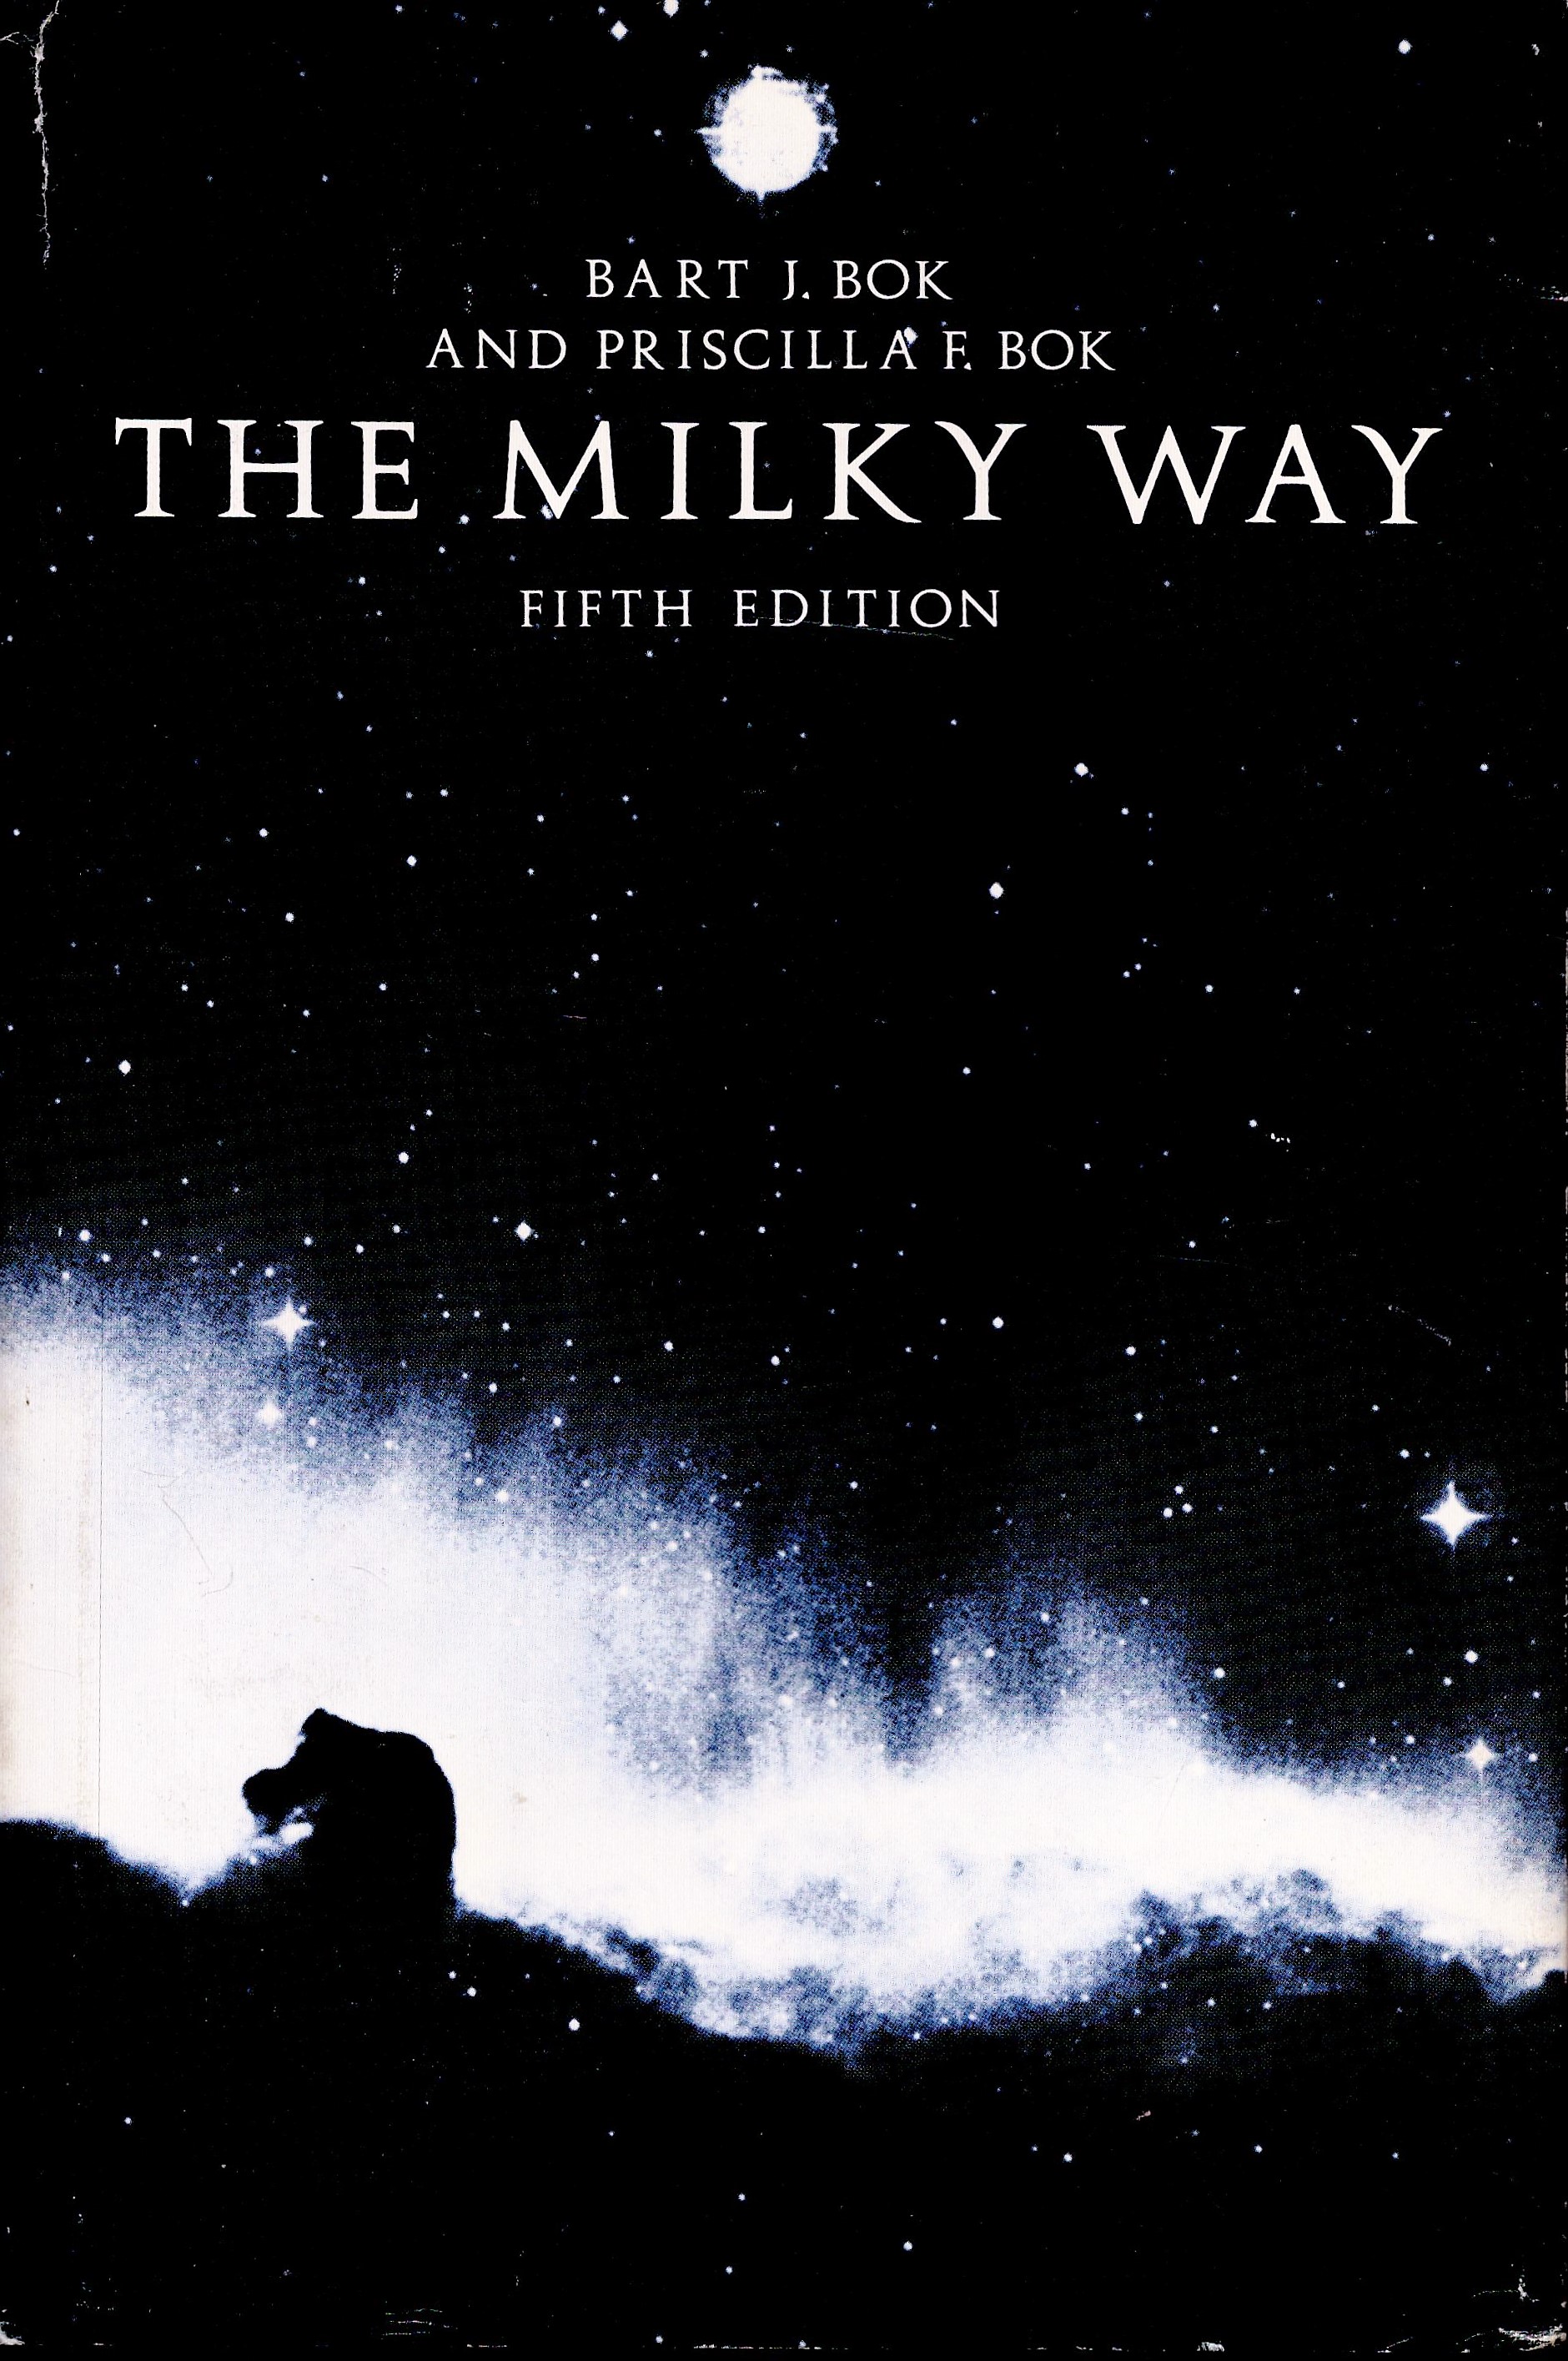 The Milky Way by Bart J and Priscilla F Bok Hardback Book Fifth Edition 1981 published by Harvard